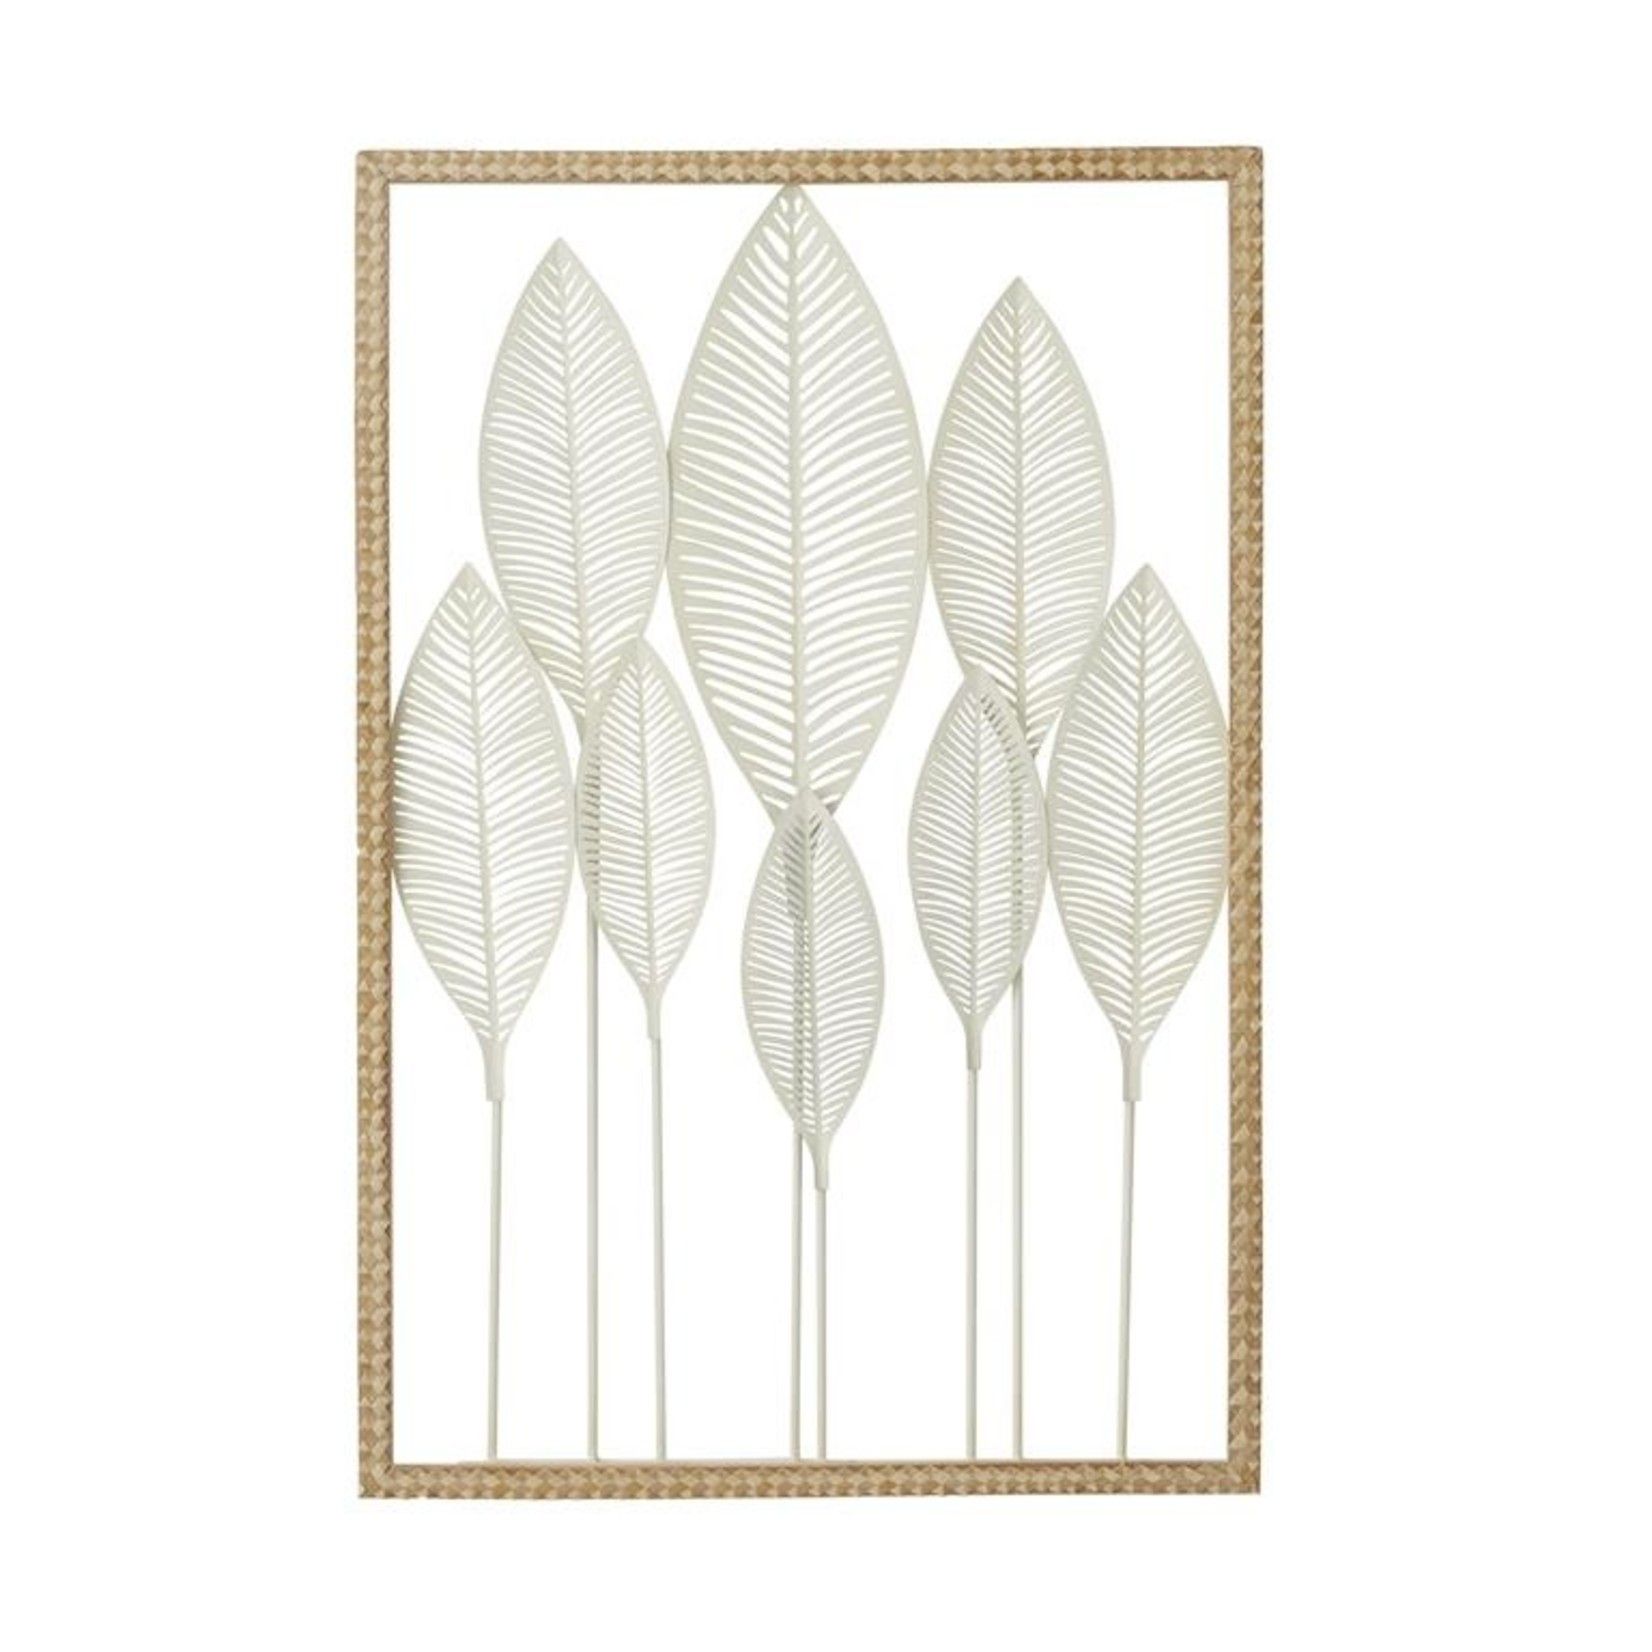 White Metal Leaf Tall Cut Out Wall Decor – Rod Works Lehi Inside Tall Cut Out Leaf Wall Art (View 11 of 15)